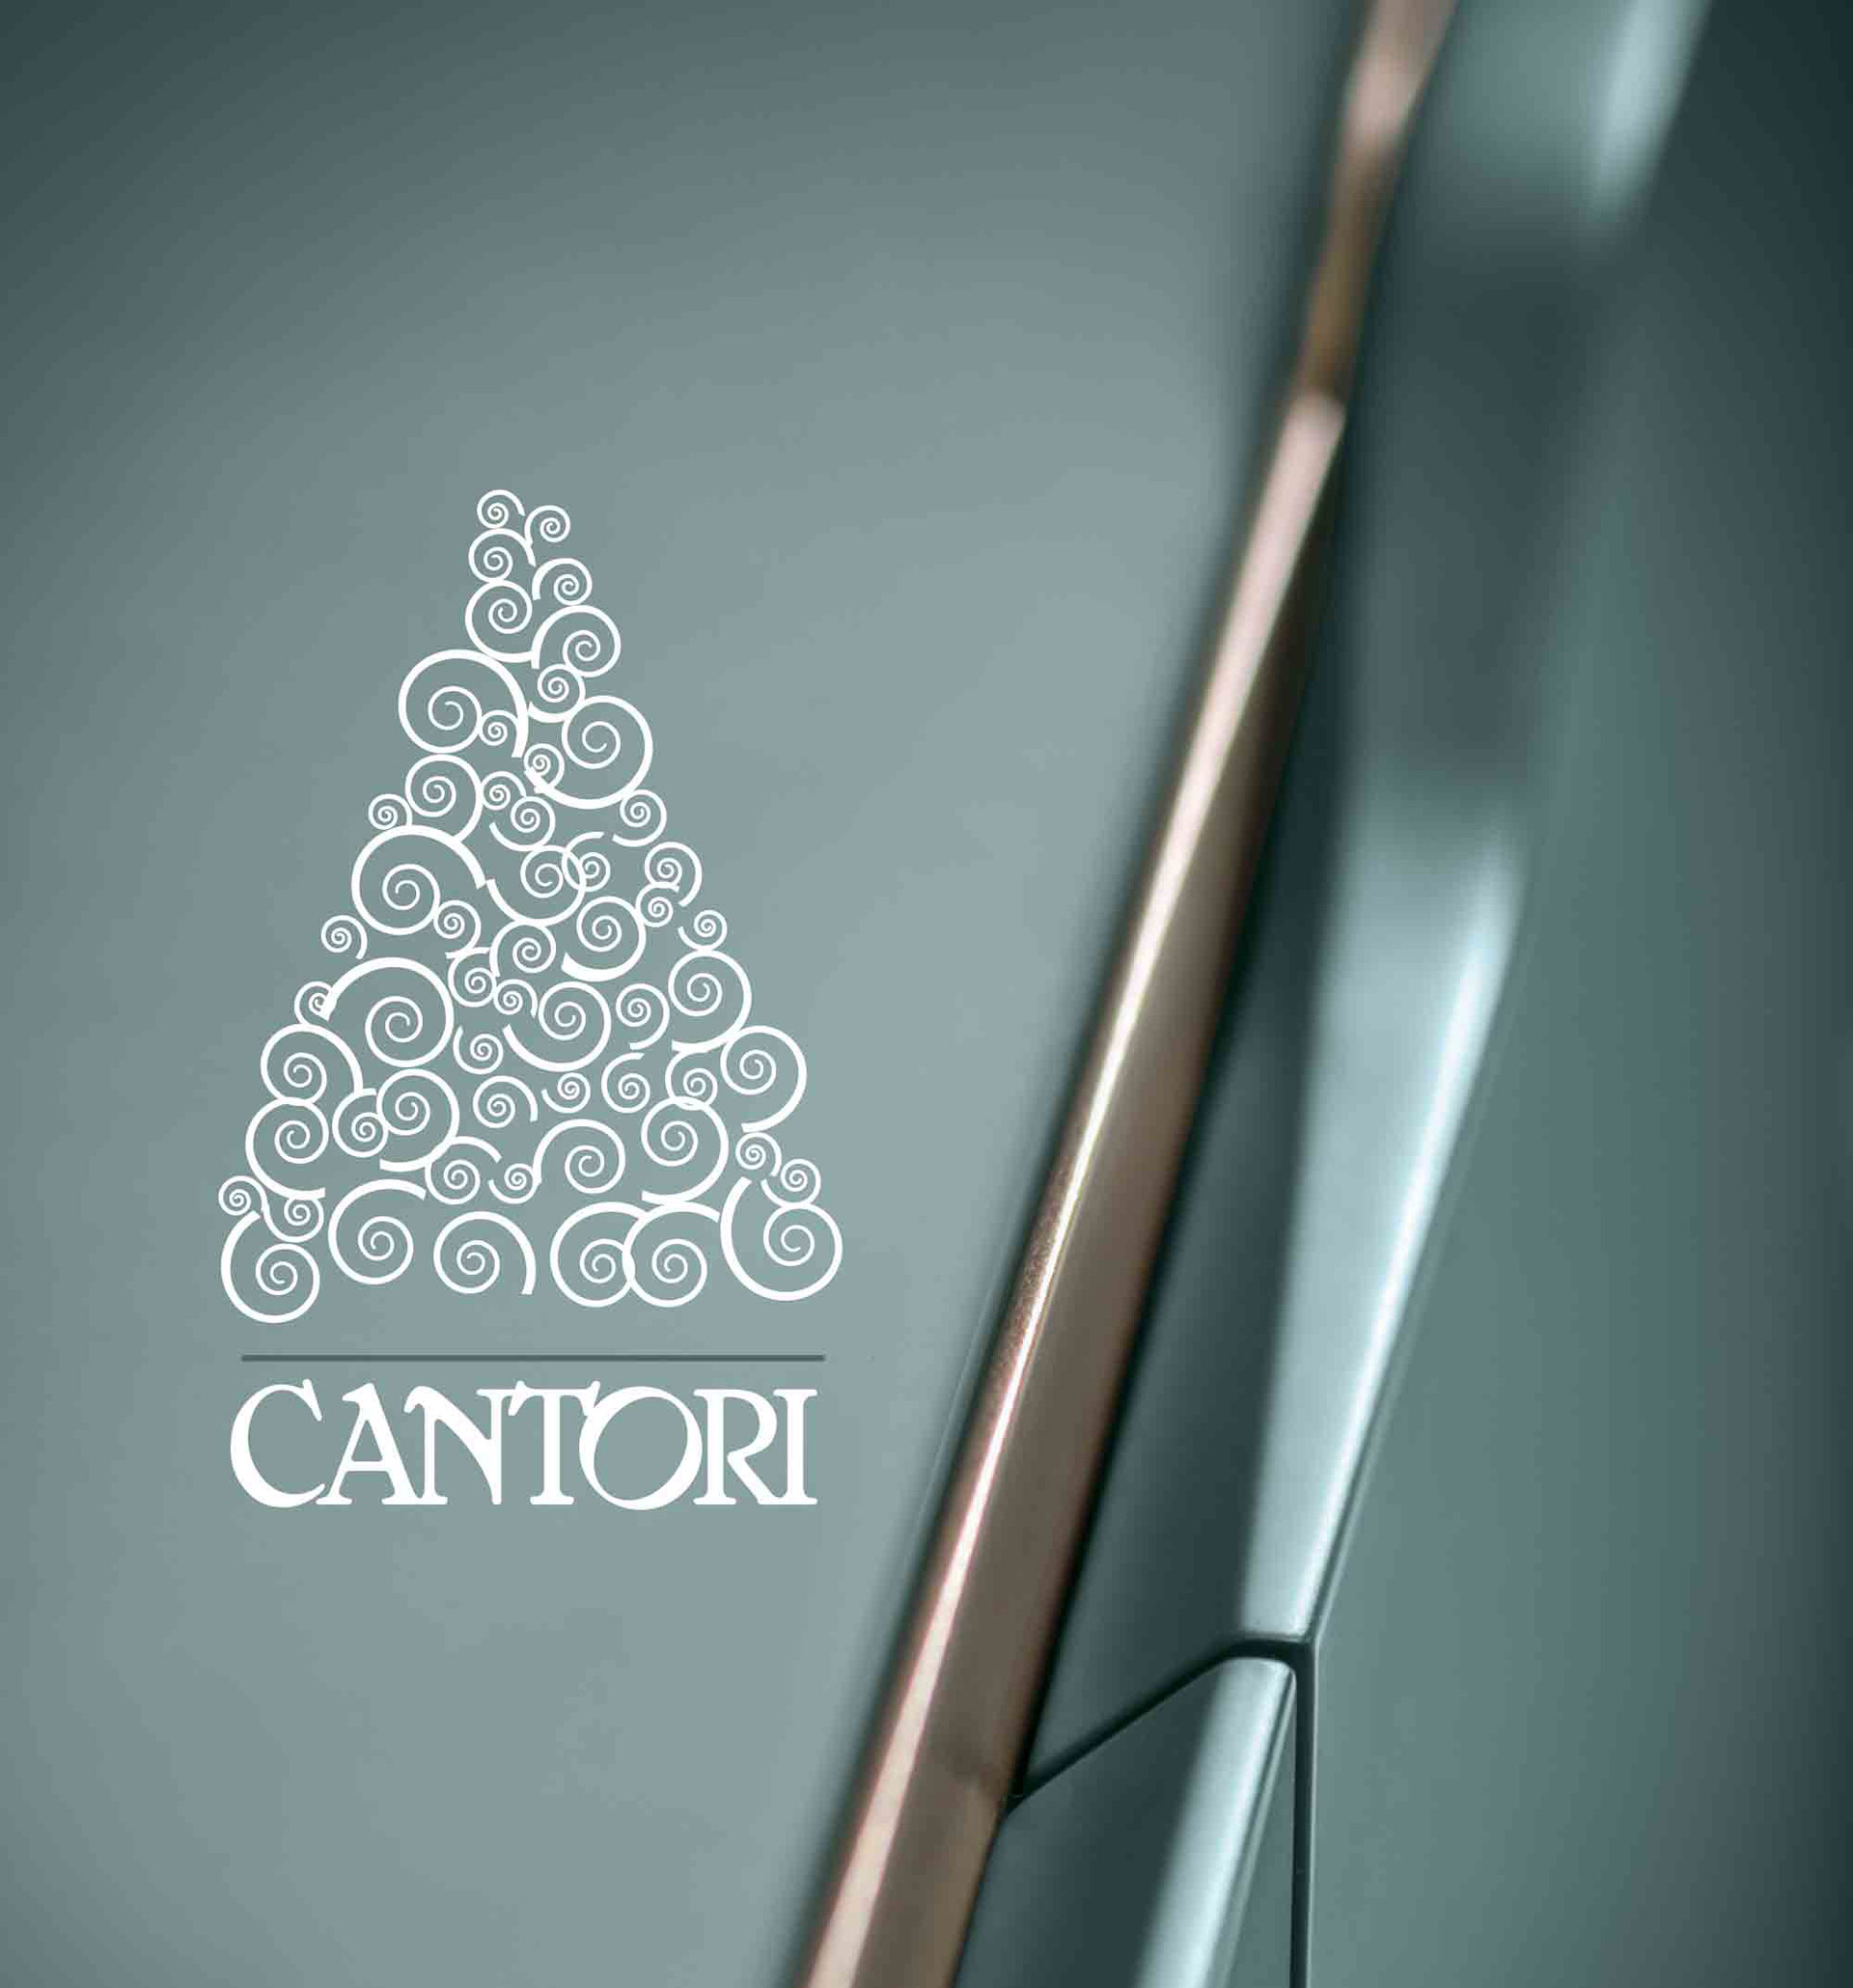 17/12/2020 Wishing you a magical and blissful holiday - Cantori